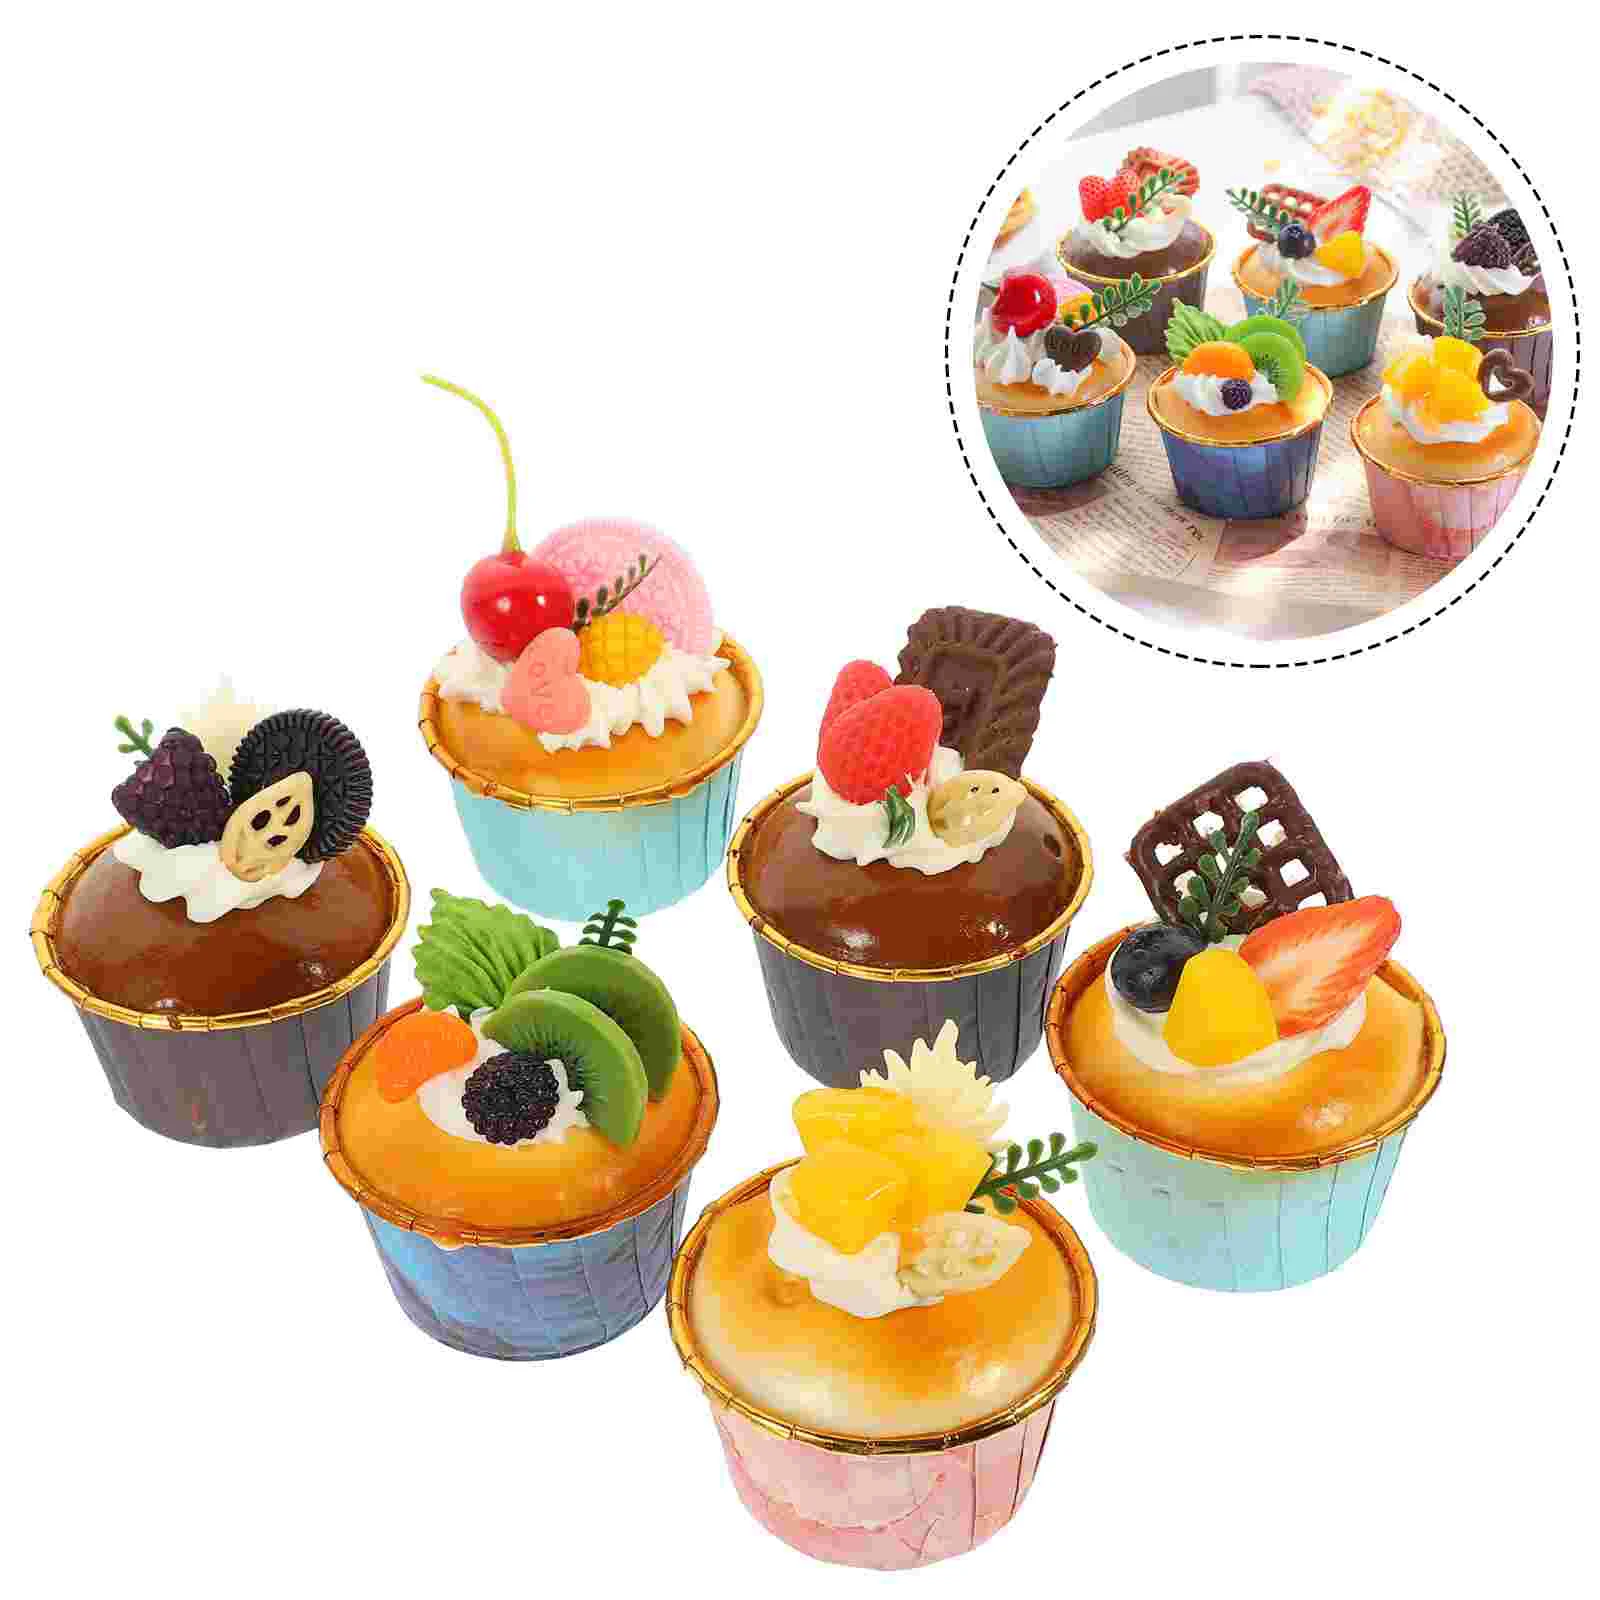 

6pcs Artificial Desserts Faux Cakes Fake Cakes Realistic Cake Models Party Ornaments